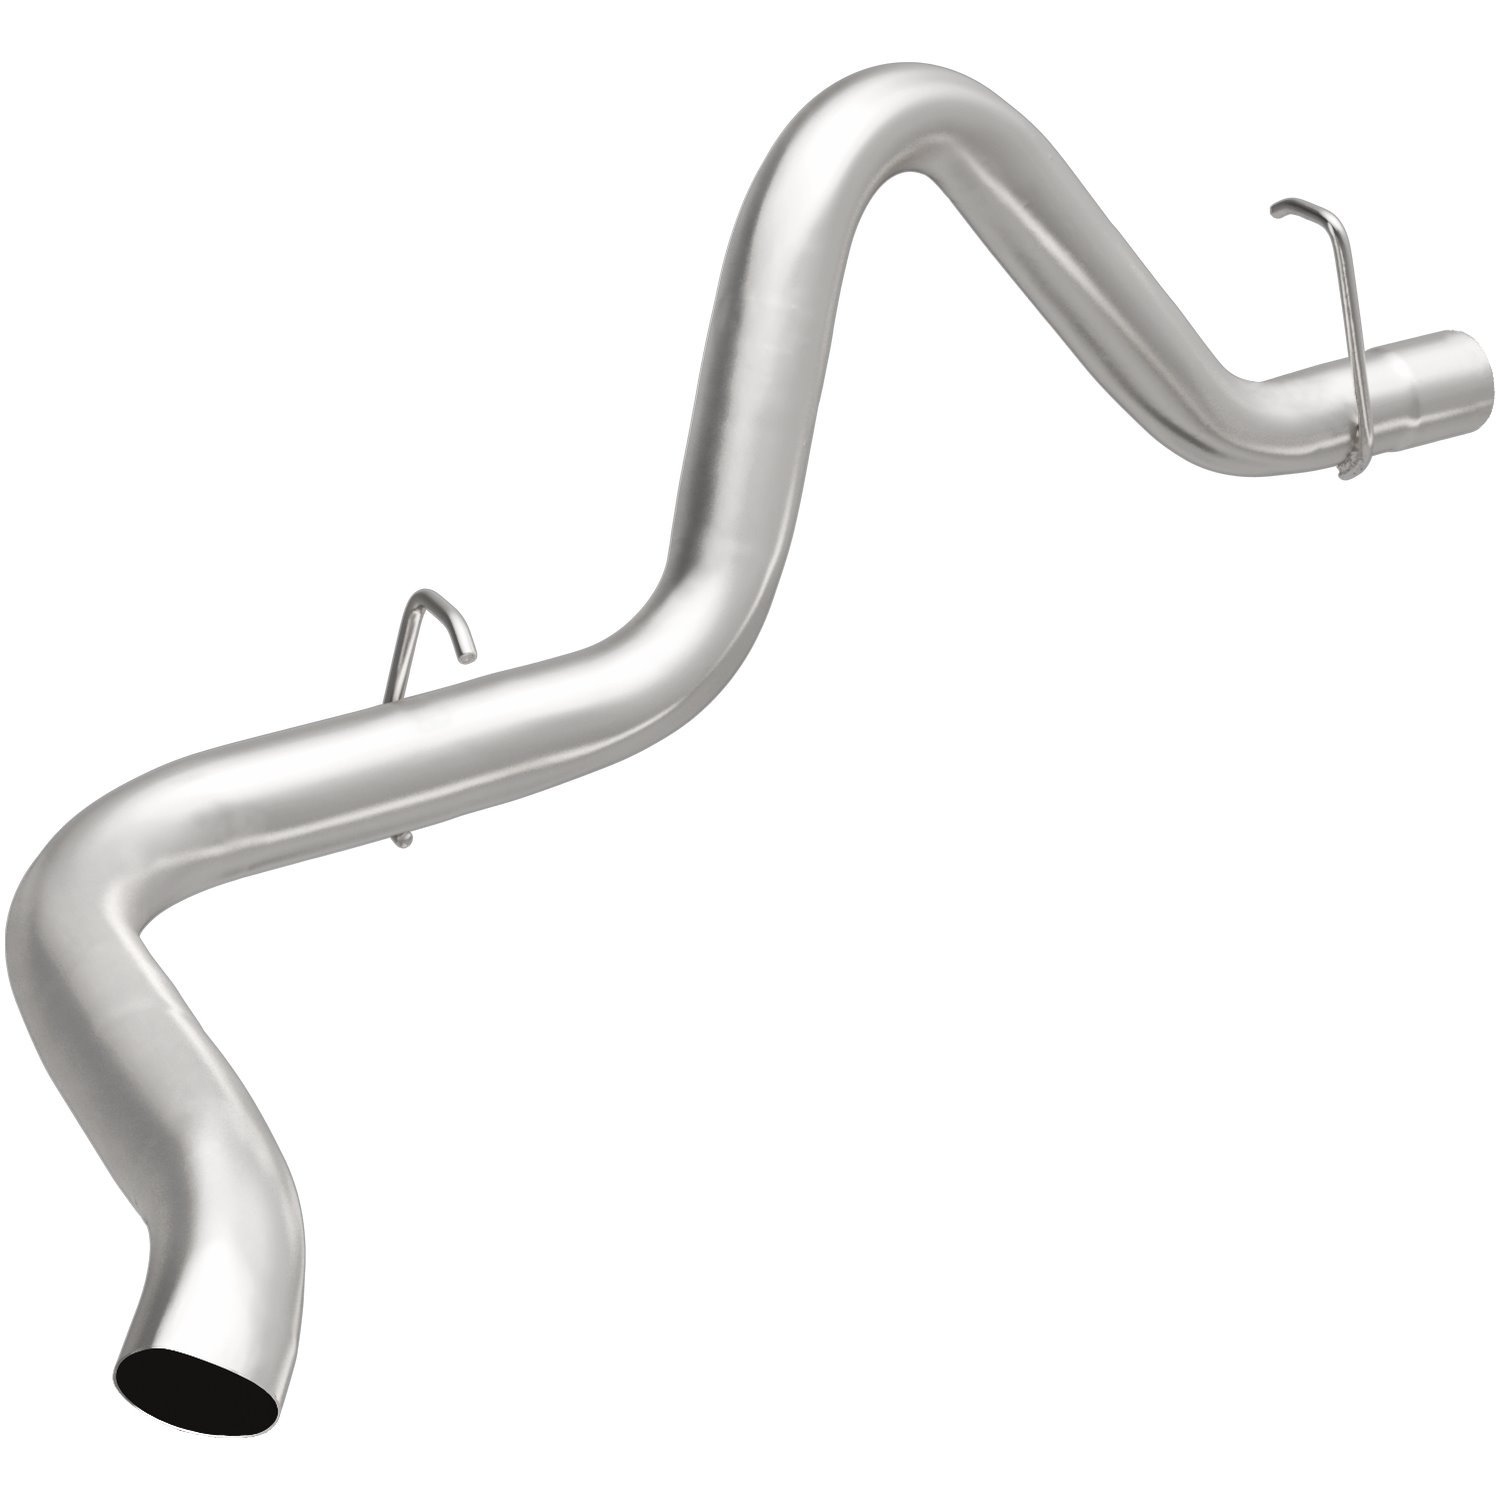 Direct-Fit Exhaust Tail Pipe, 1994-1995 GM C/K 1500/2500, Suburban 5.7L